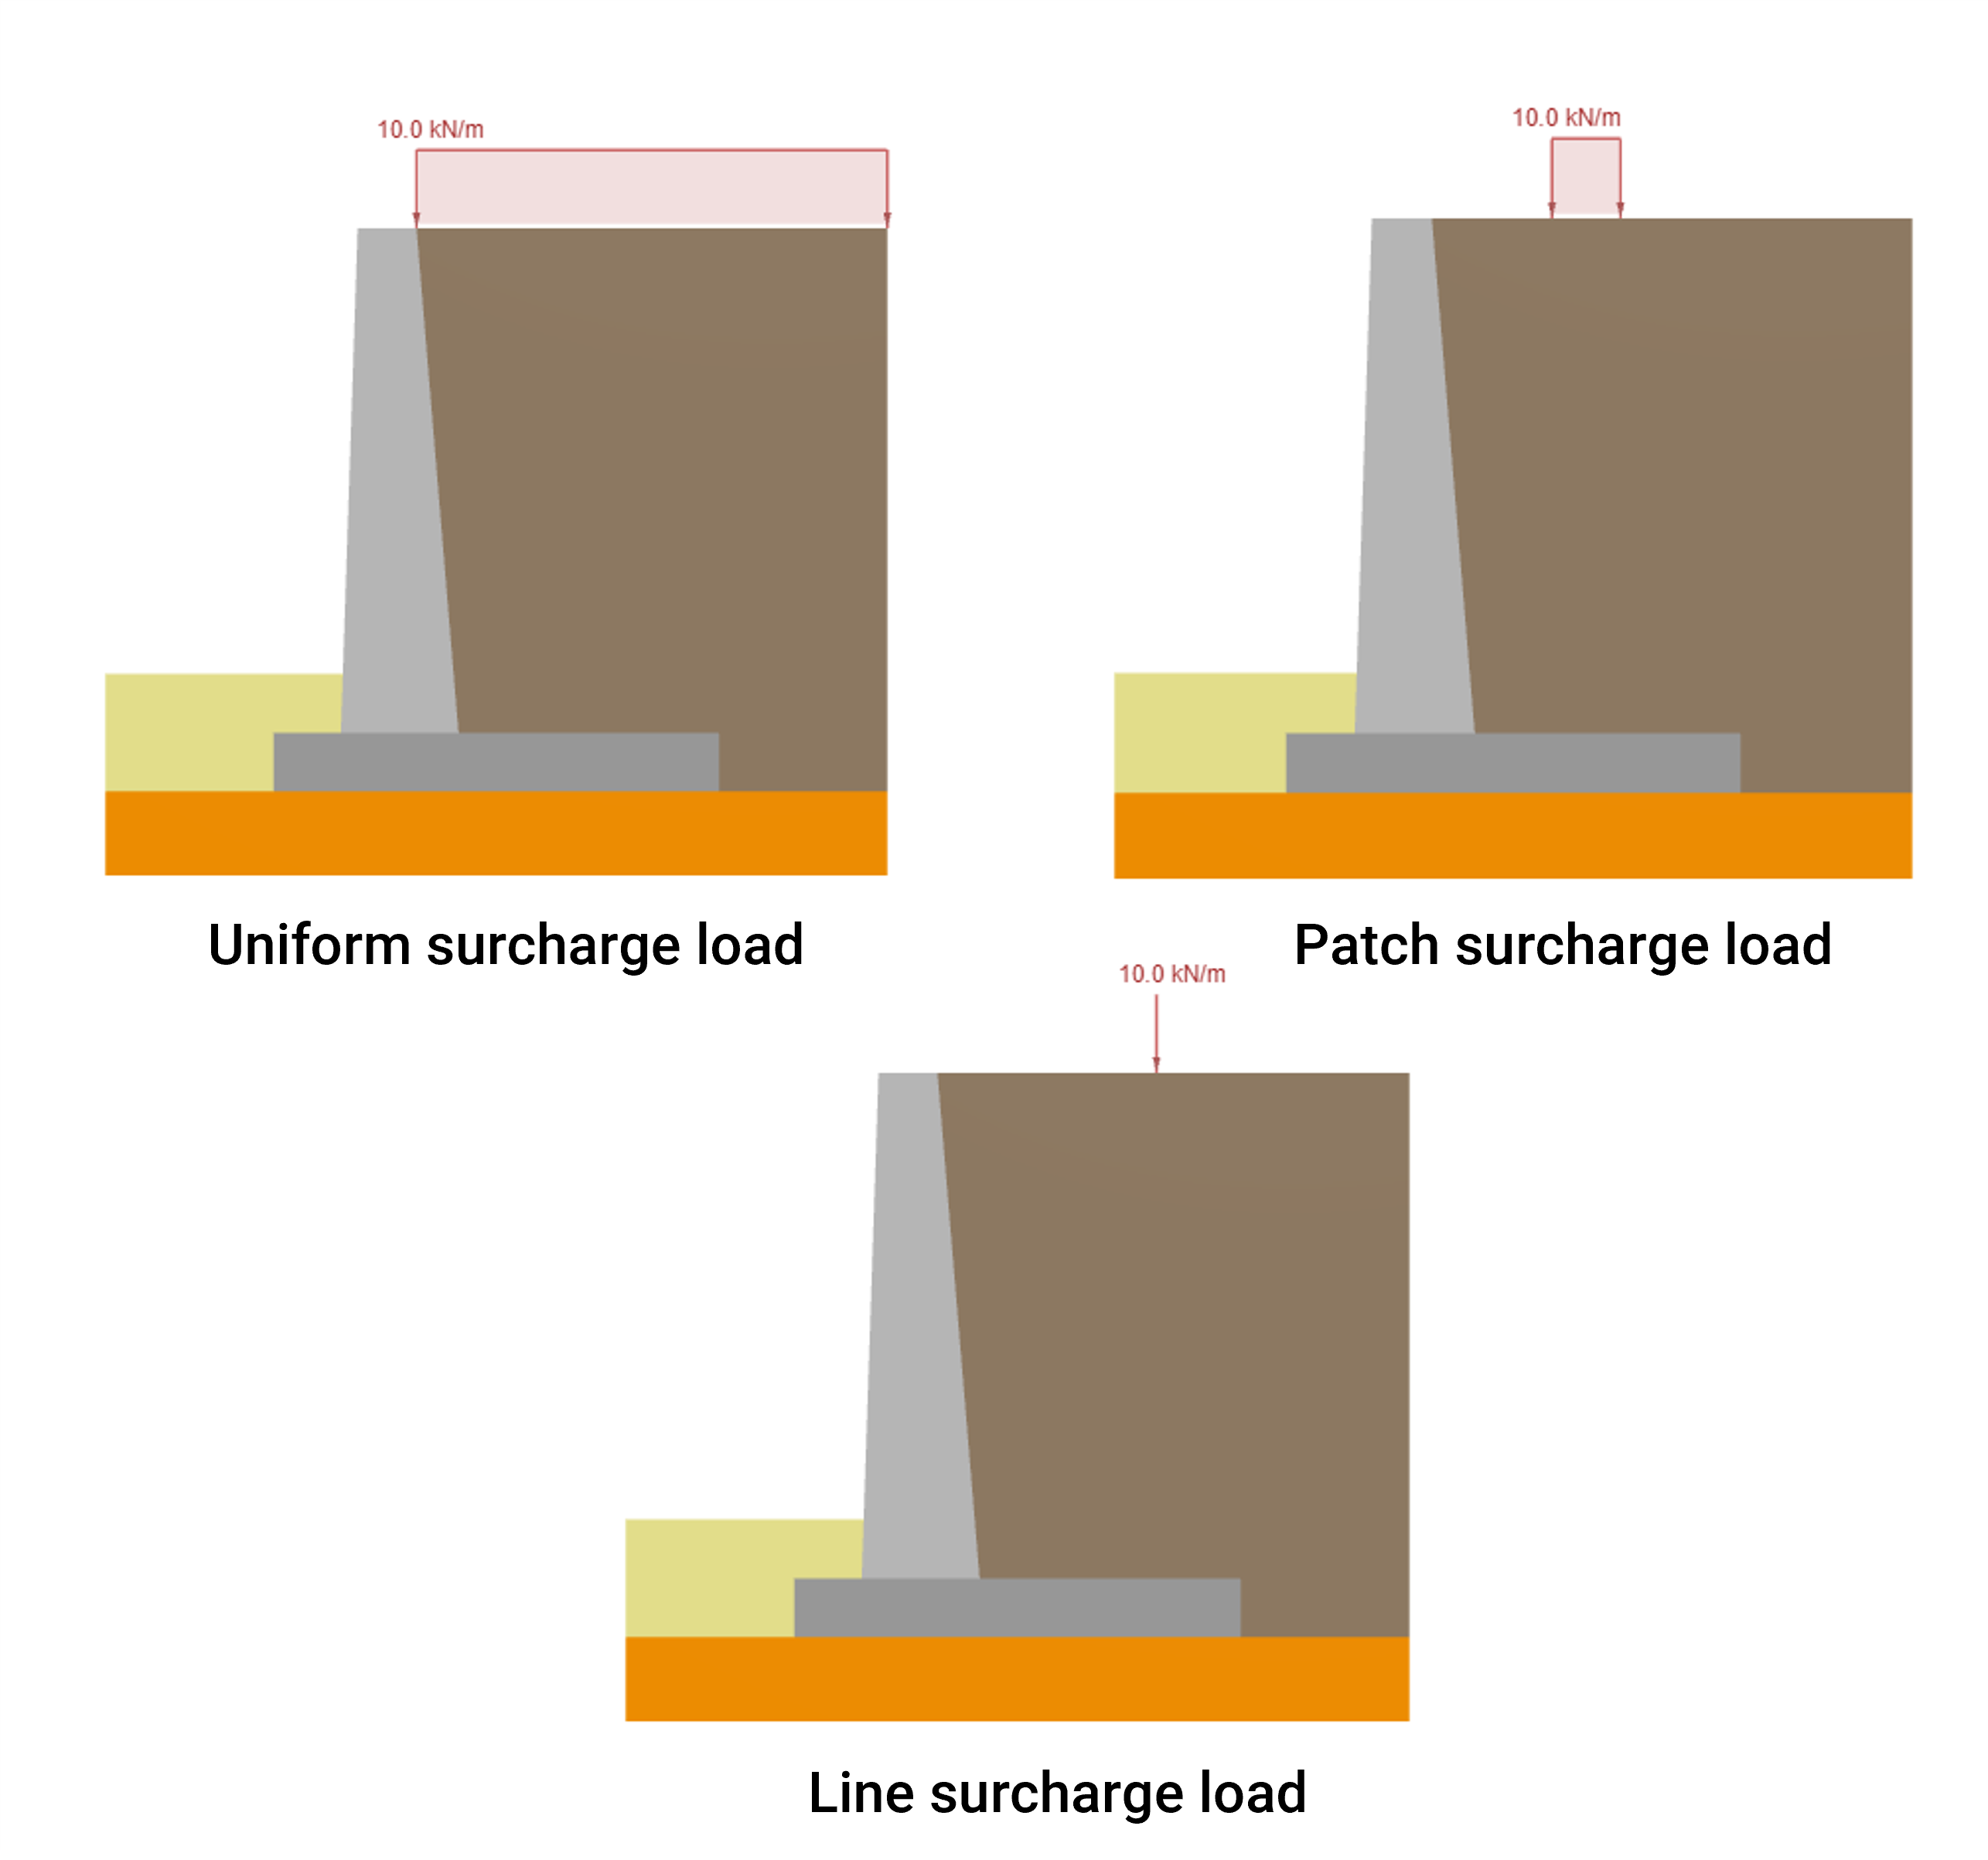 Skyciv Concrete Retaining Wall showing different types of Surcharge Loads